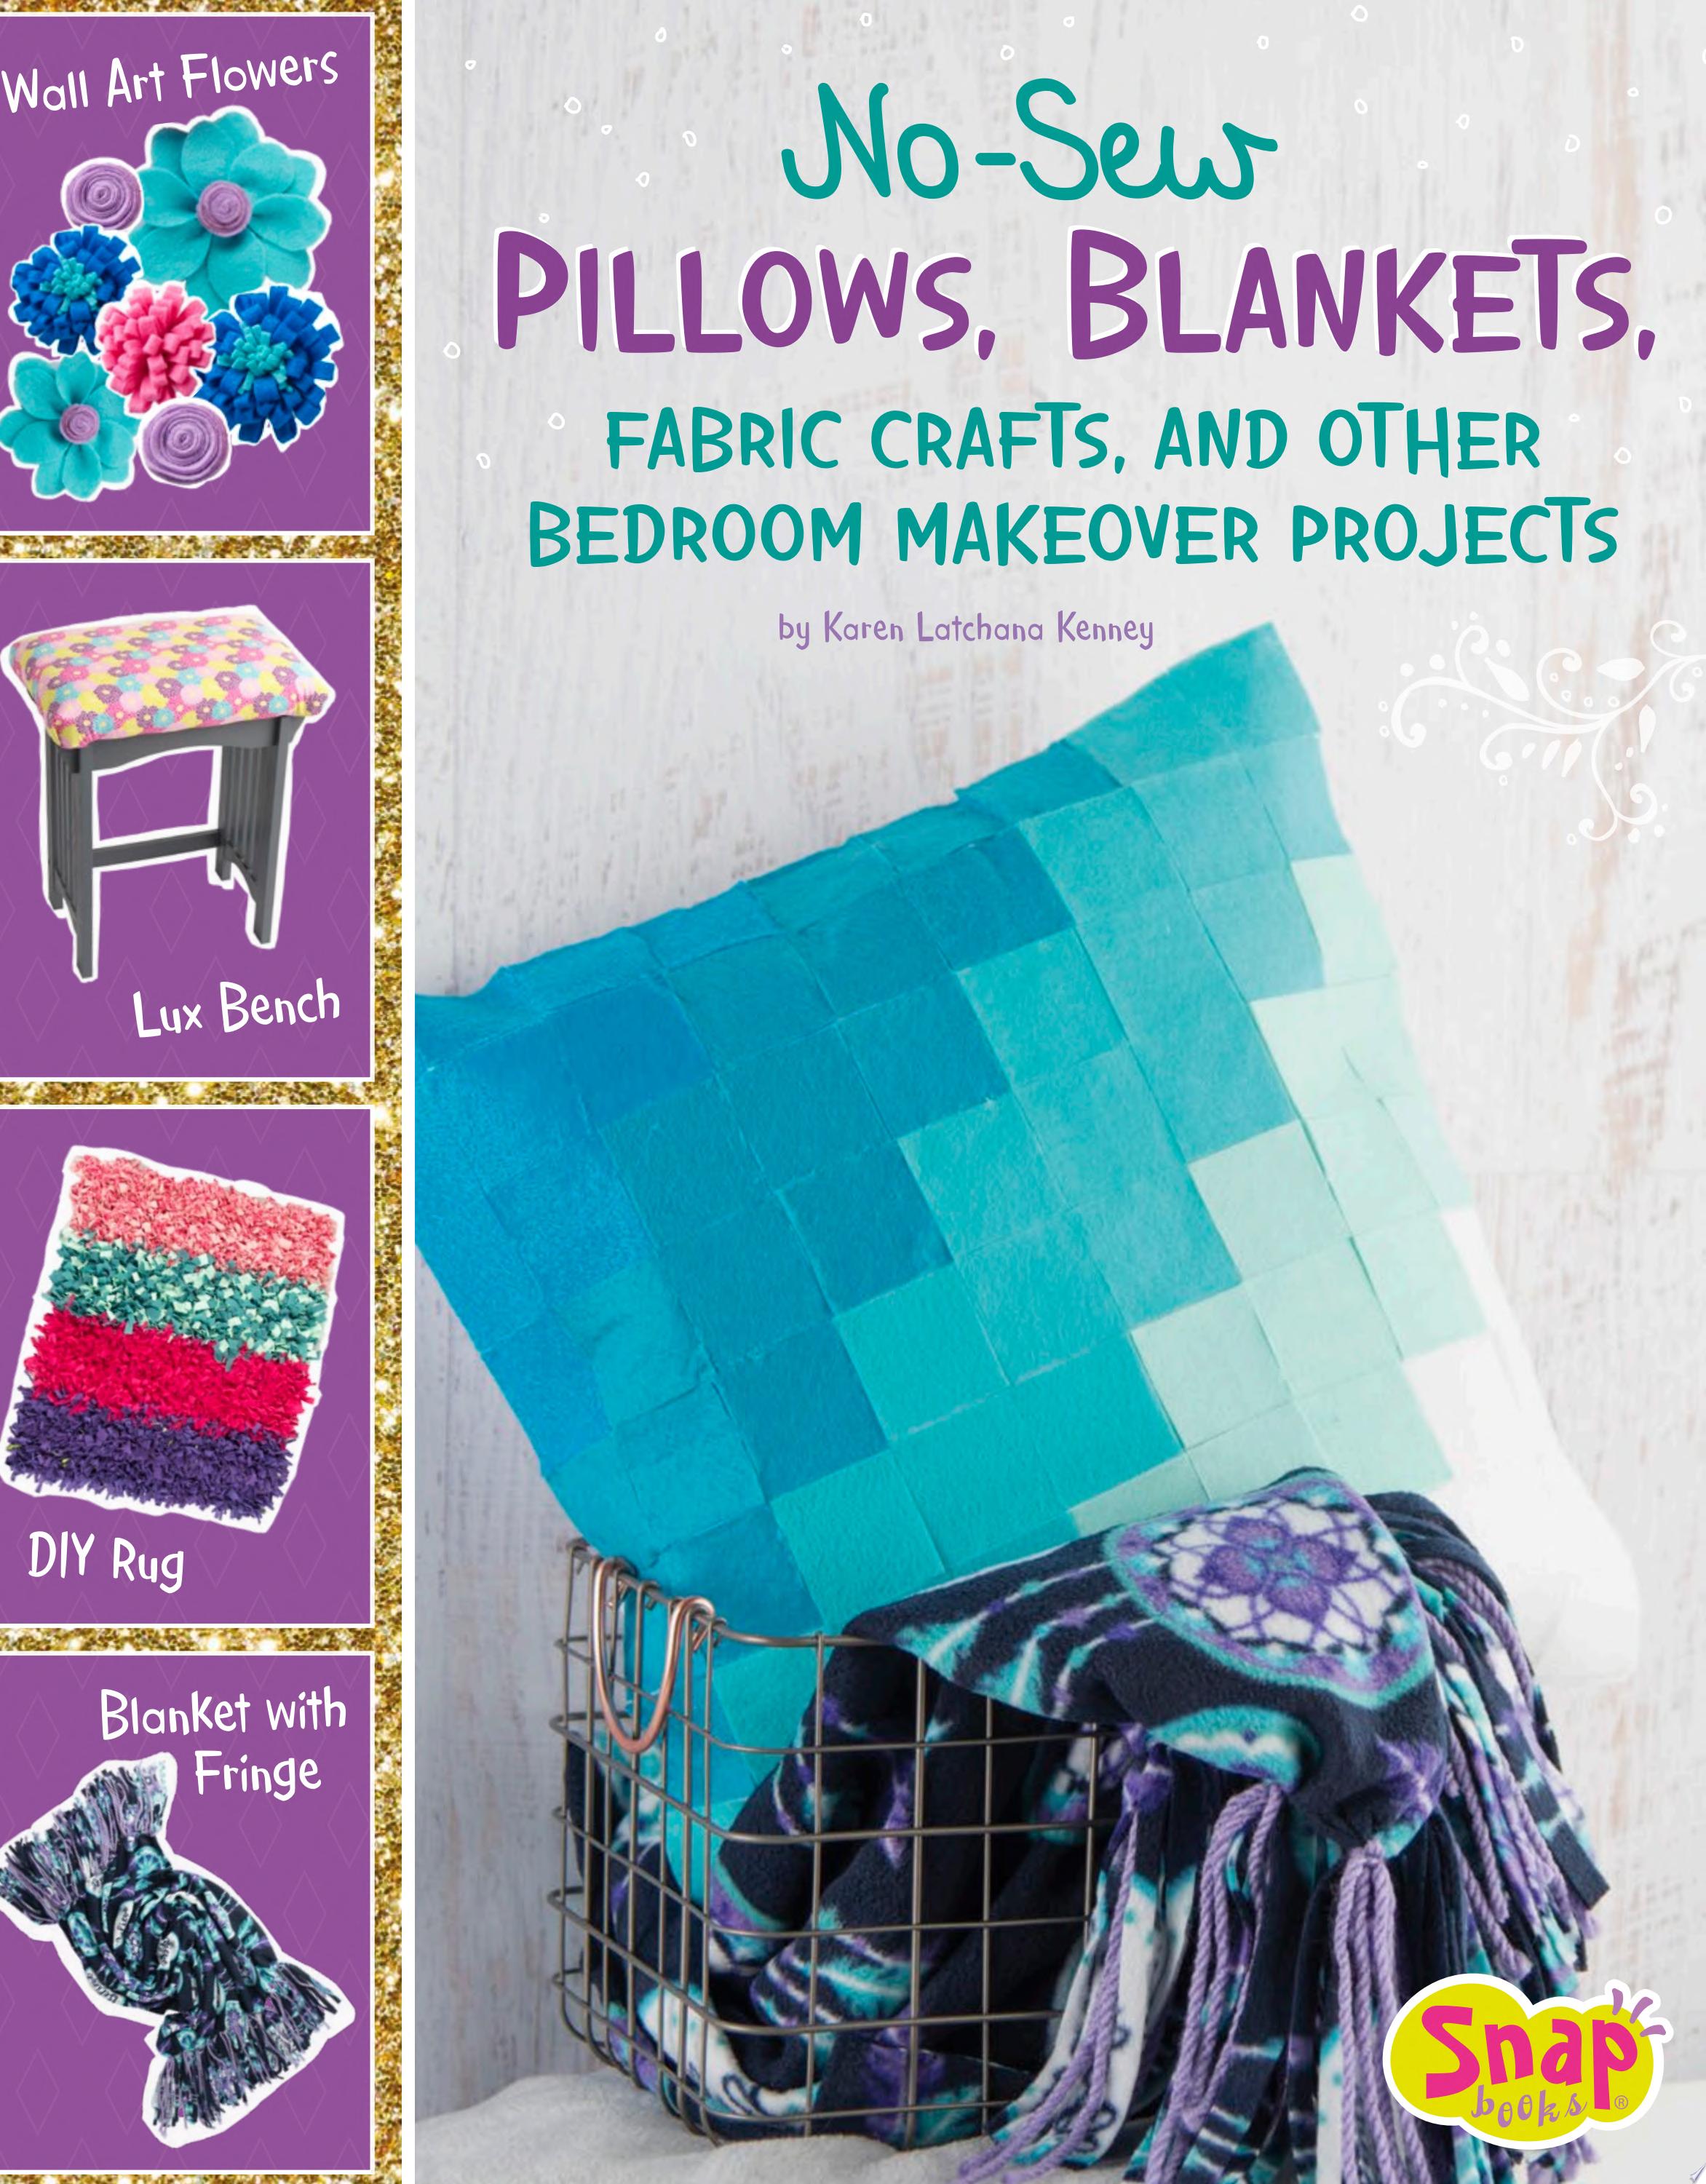 Image for "No-Sew Pillows, Blankets, Fabric Crafts, and Other Bedroom Makeover Projects"